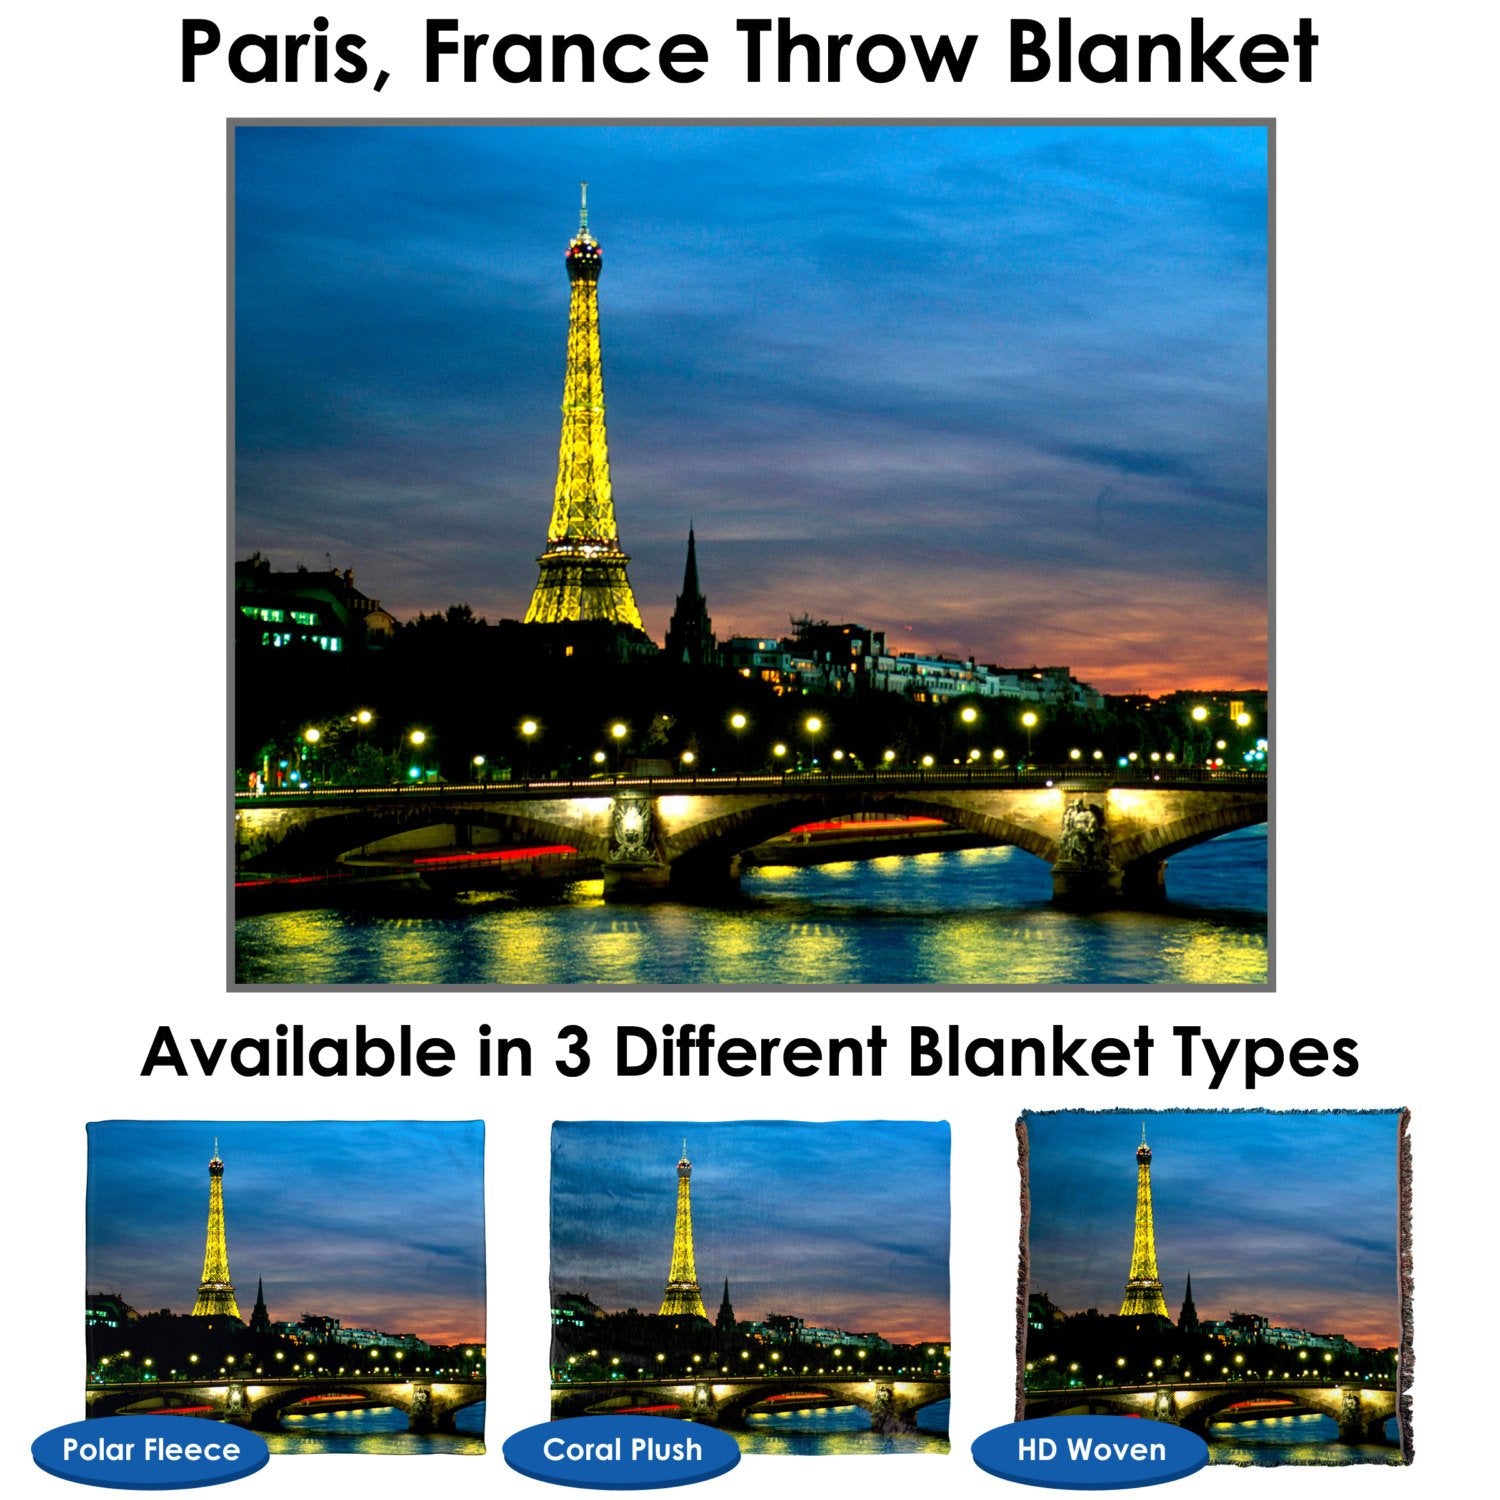 Paris, France Throw Blanket / Tapestry Wall Hanging - Standard Multi-color